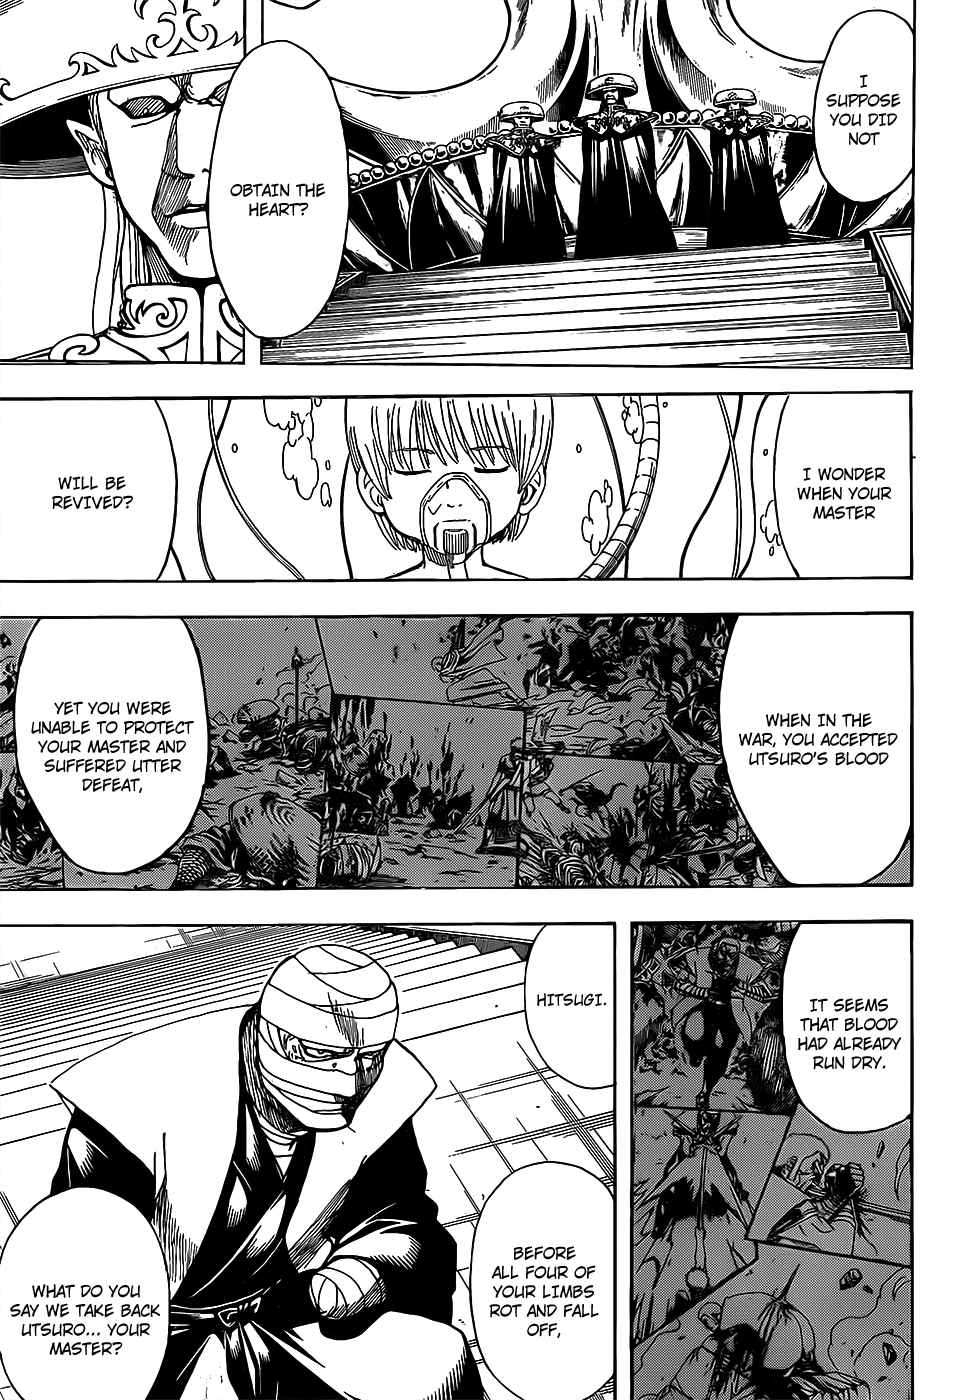 Gintama Vol. 76 Ch. 683 Watch Out for Hamichin